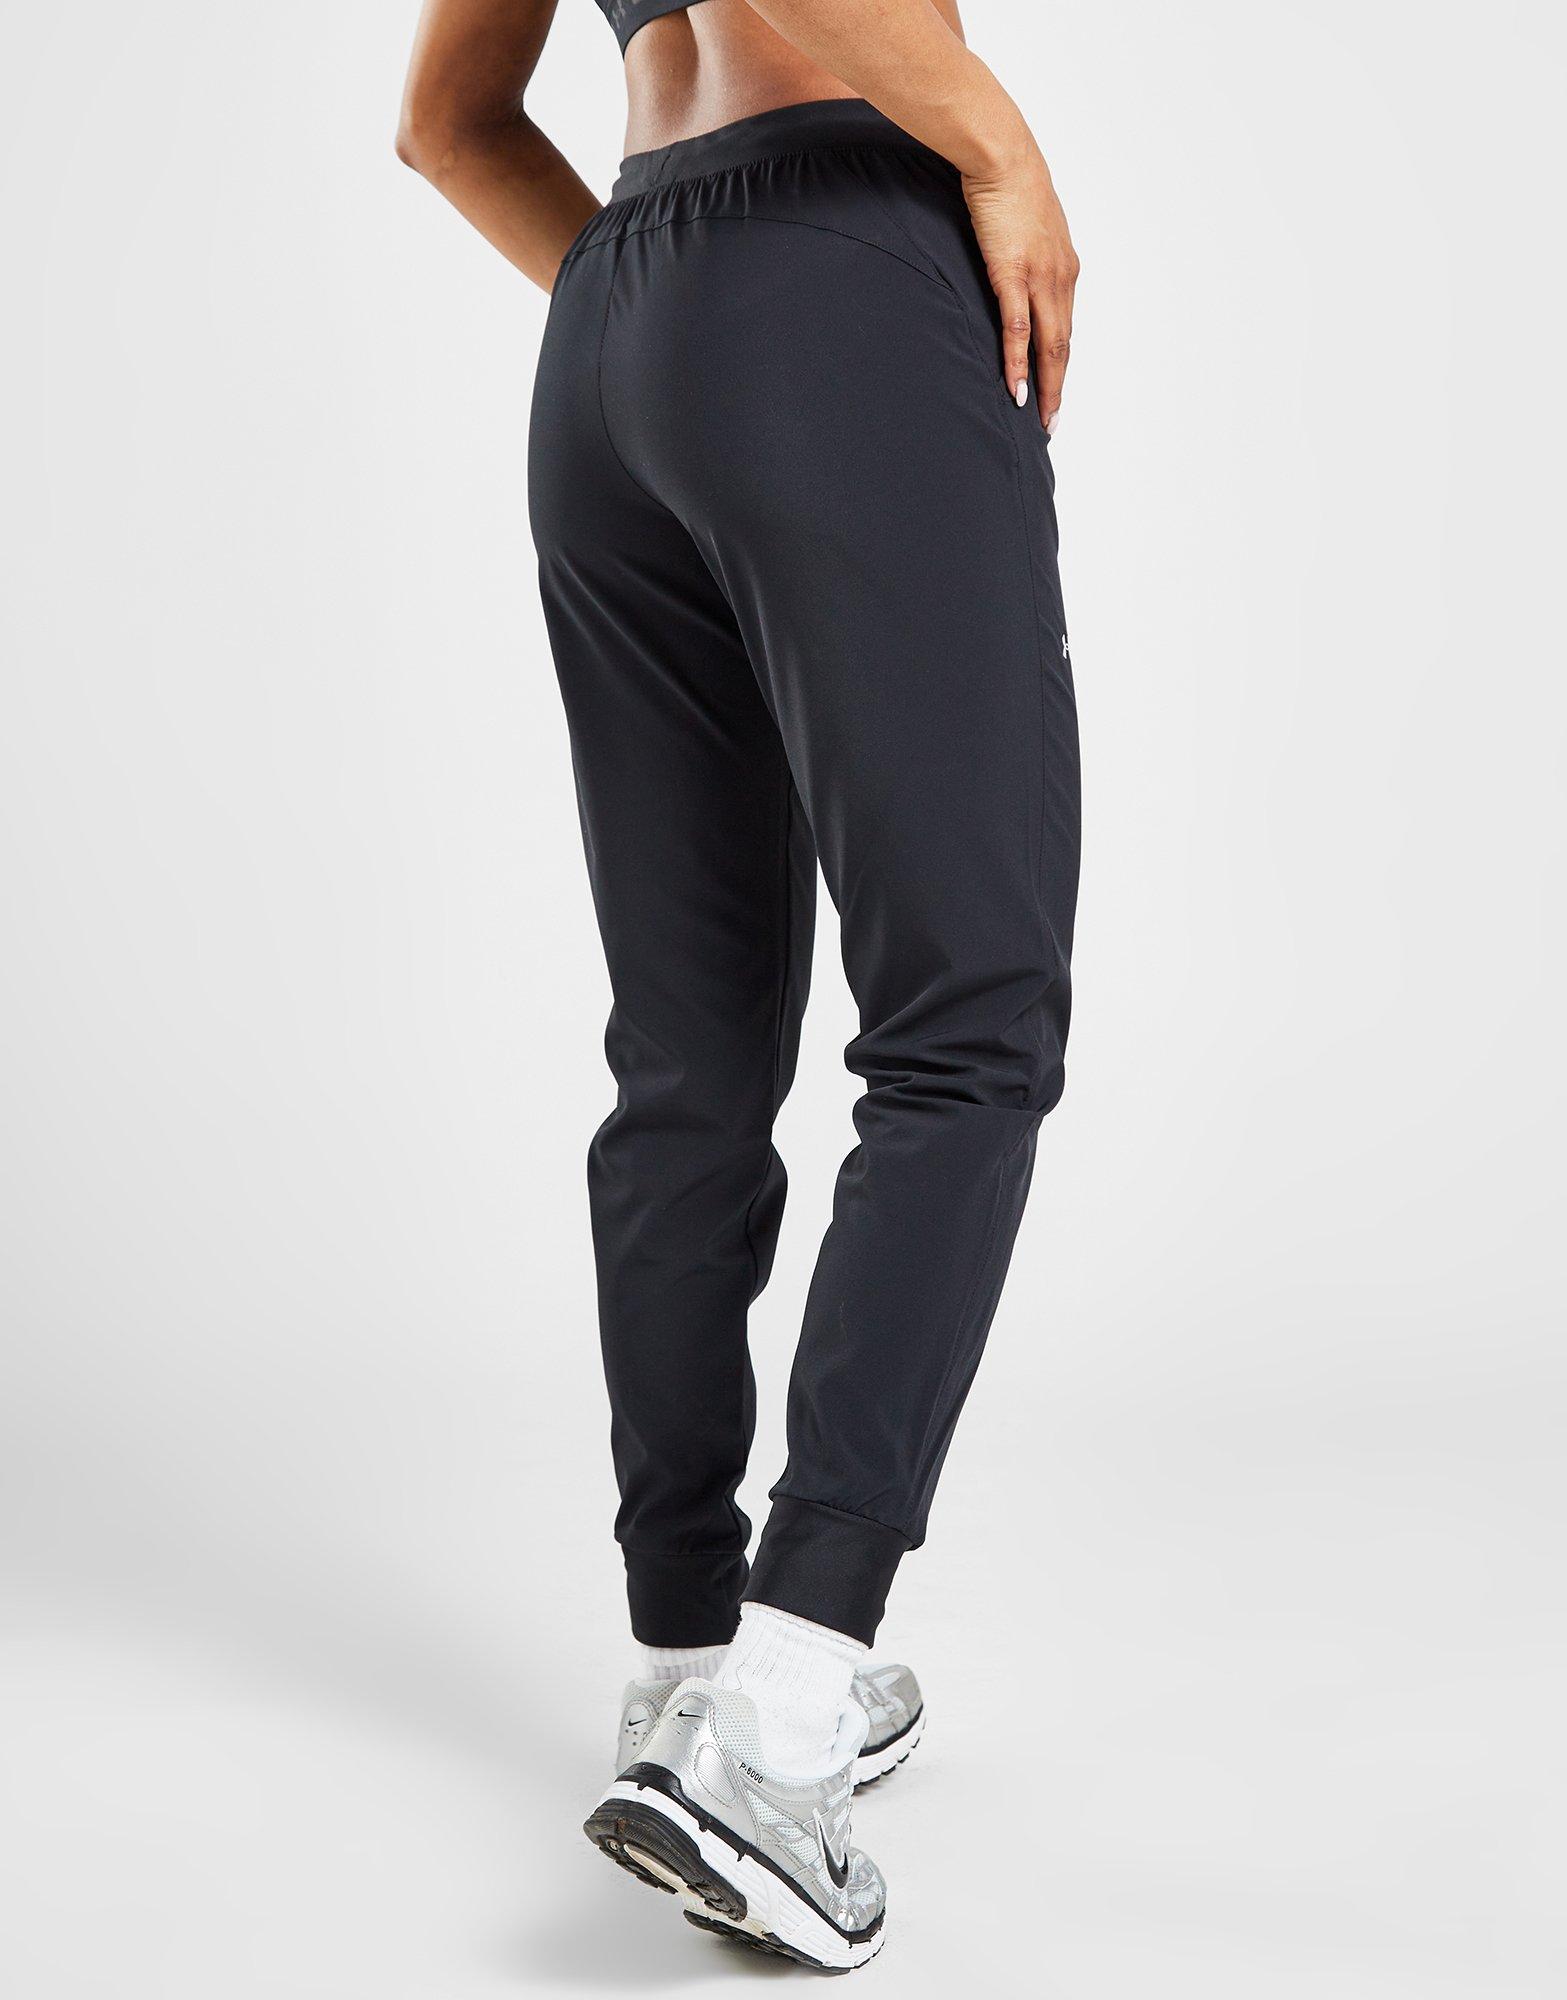 Under Armour Tape Joggers - Grey - Womens from Jd Sports on 21 Buttons